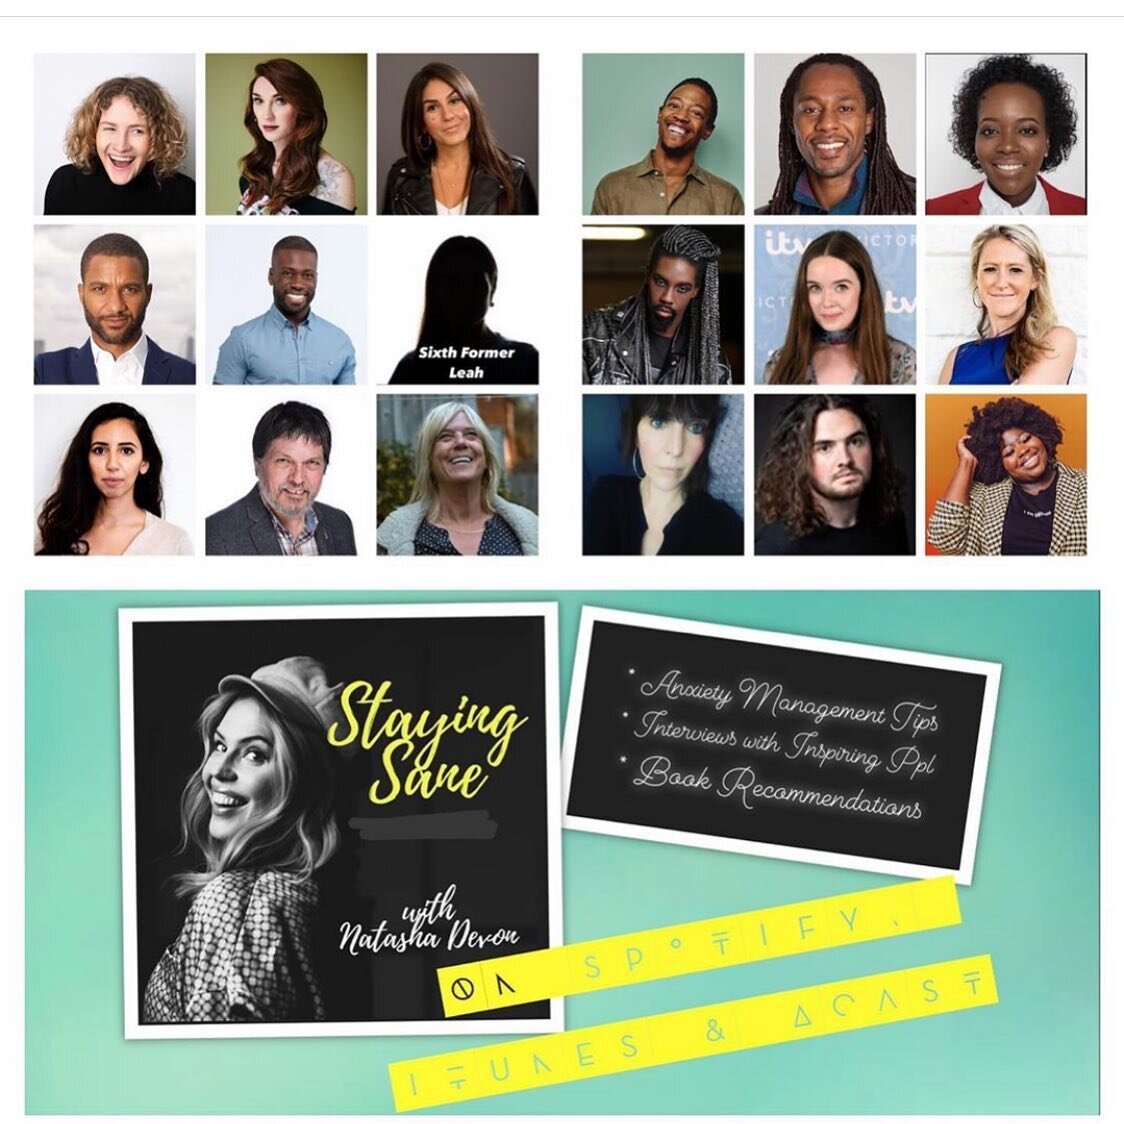 @_natashadevon&rsquo;s podcast #StayingSane has tips on managing #anxiety and #stress, #book recommendations and interviews with inspiring people (including our @shahroo_izadi @seanfletchertv @omazie and @hopevirgo_ ). Link to all 22 episodes is in h